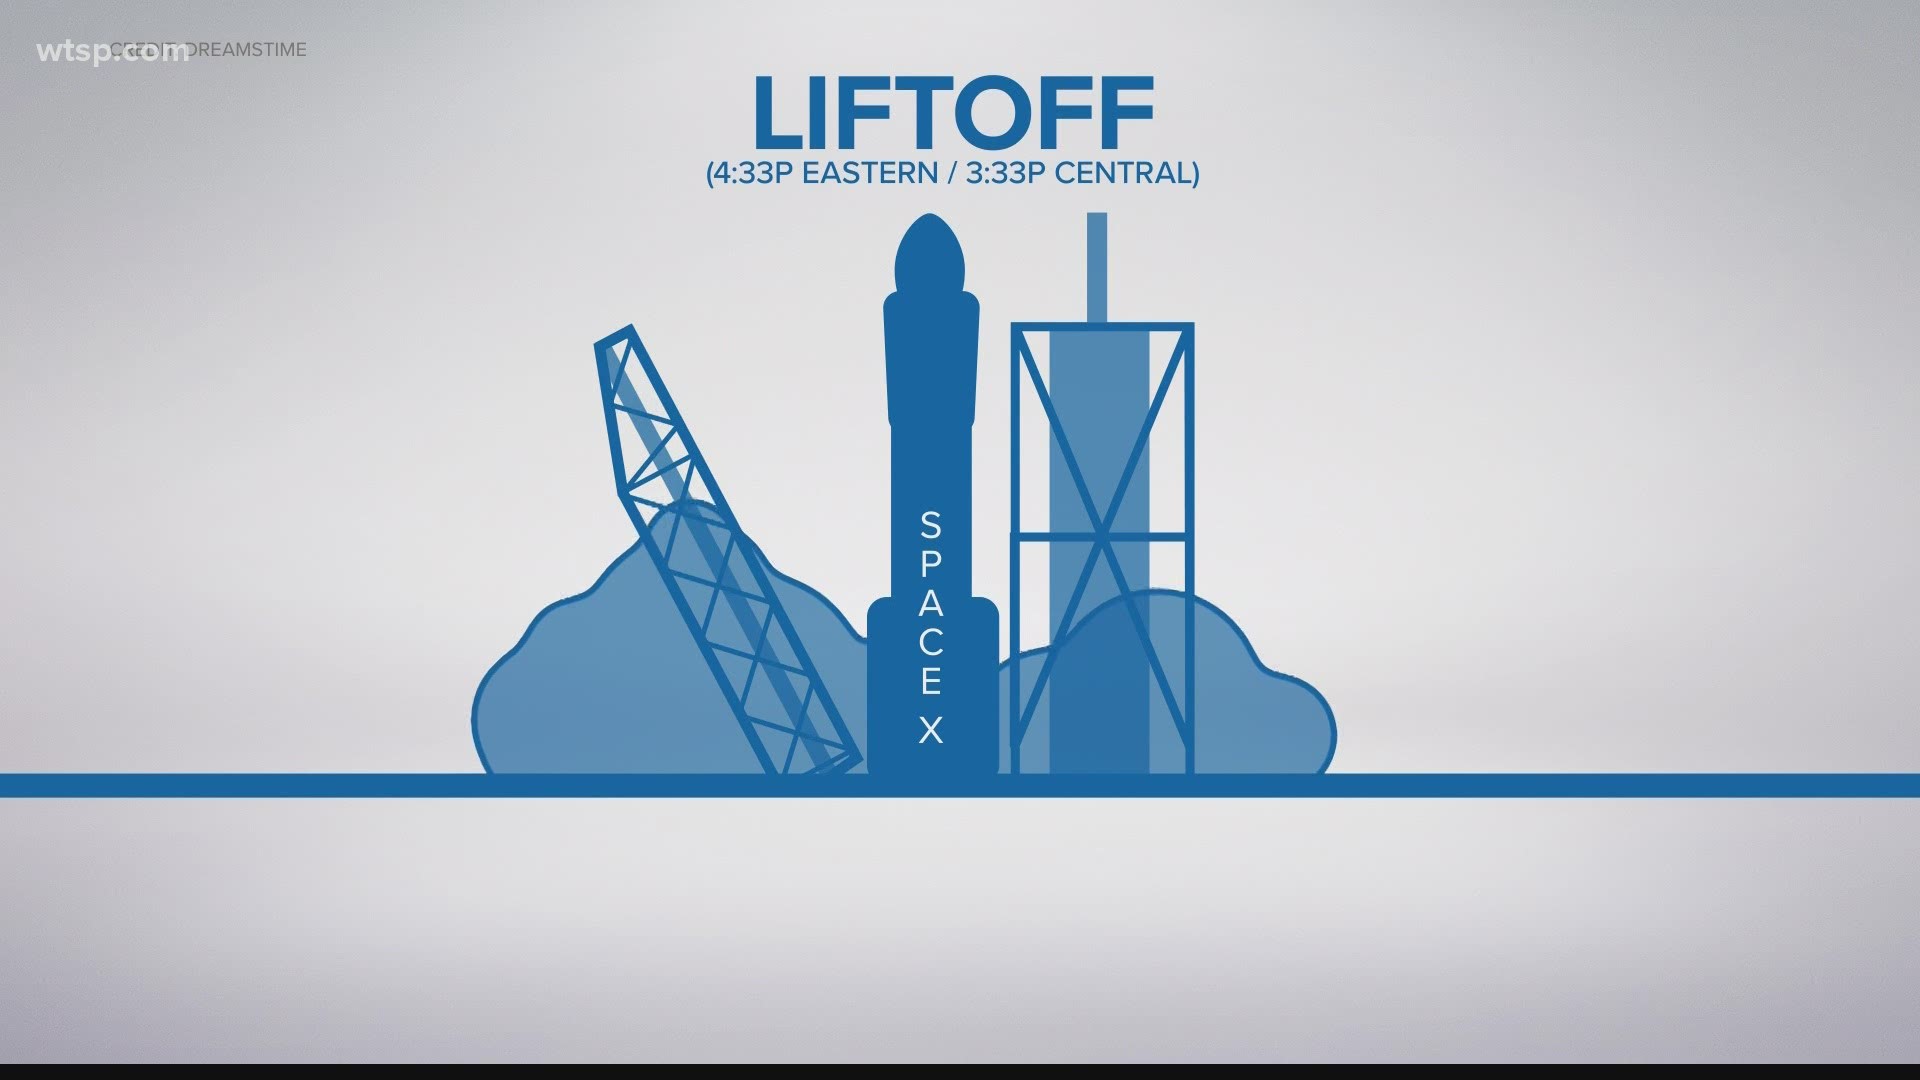 How To Watch Spacex Nasa Launch Online Wtsp Com